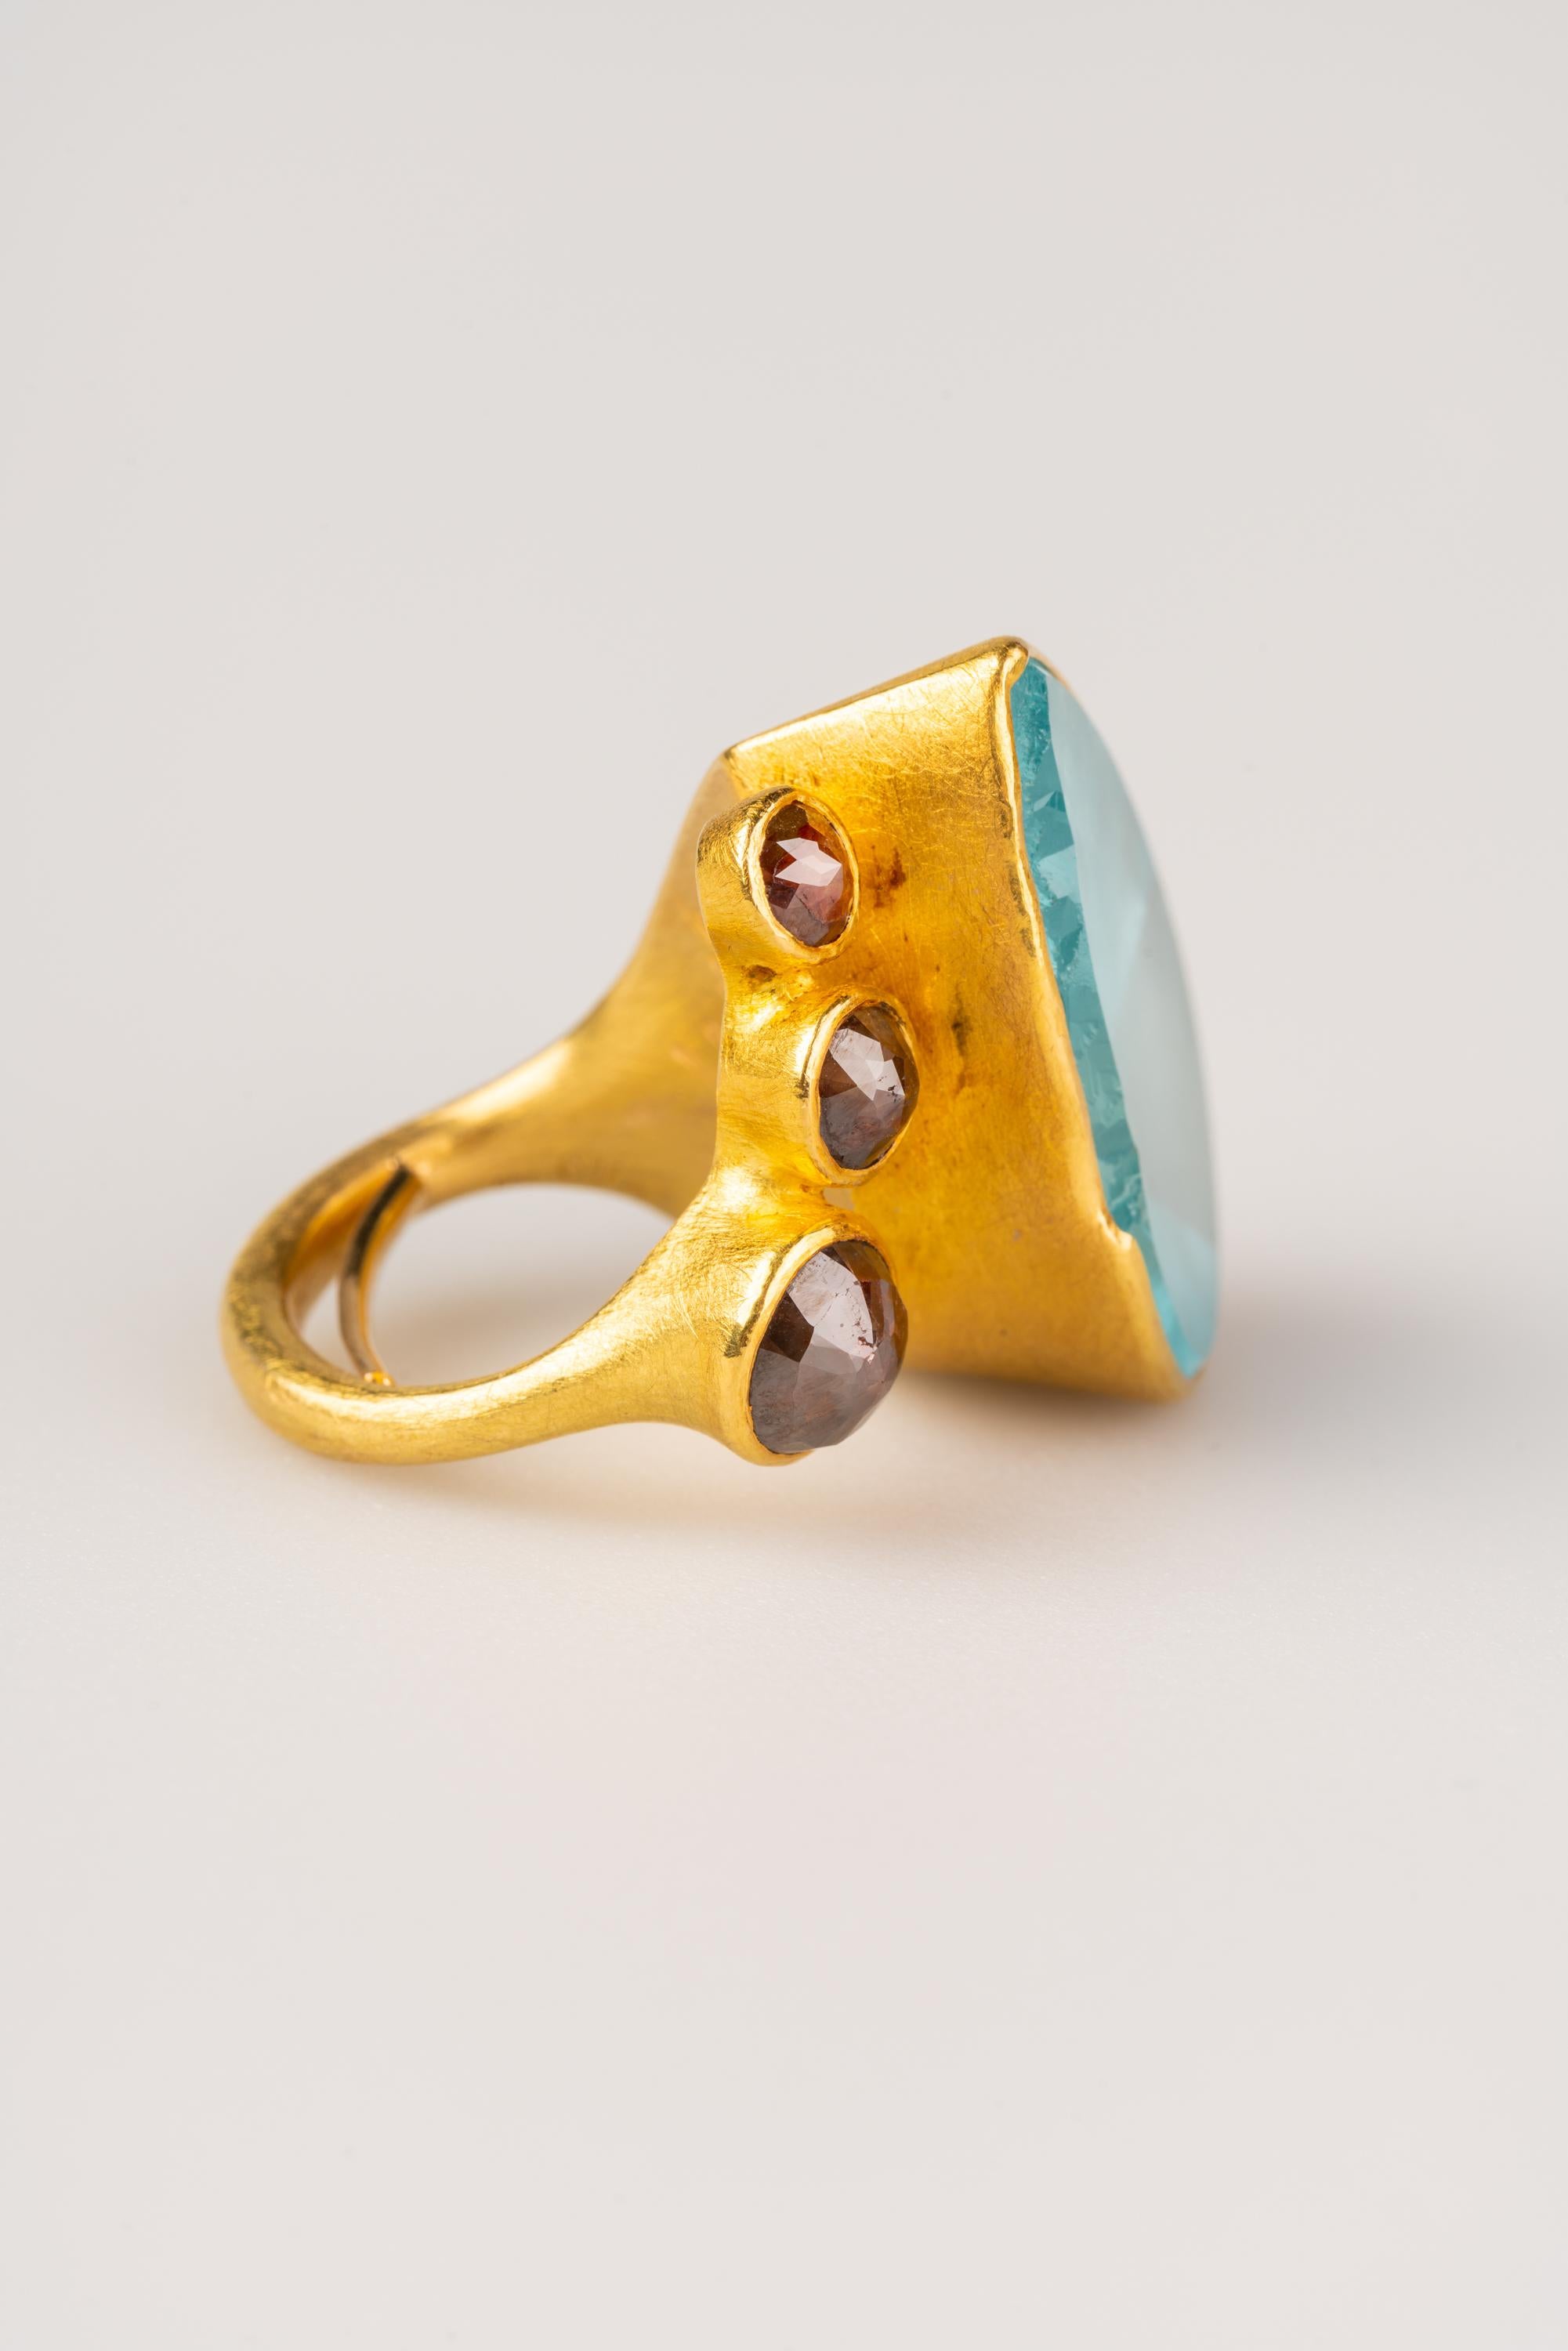 Contemporary 18 Karat Gold 45.82 Carat Pear Shaped Aquamarine Ring with Rose Cut Diamonds For Sale